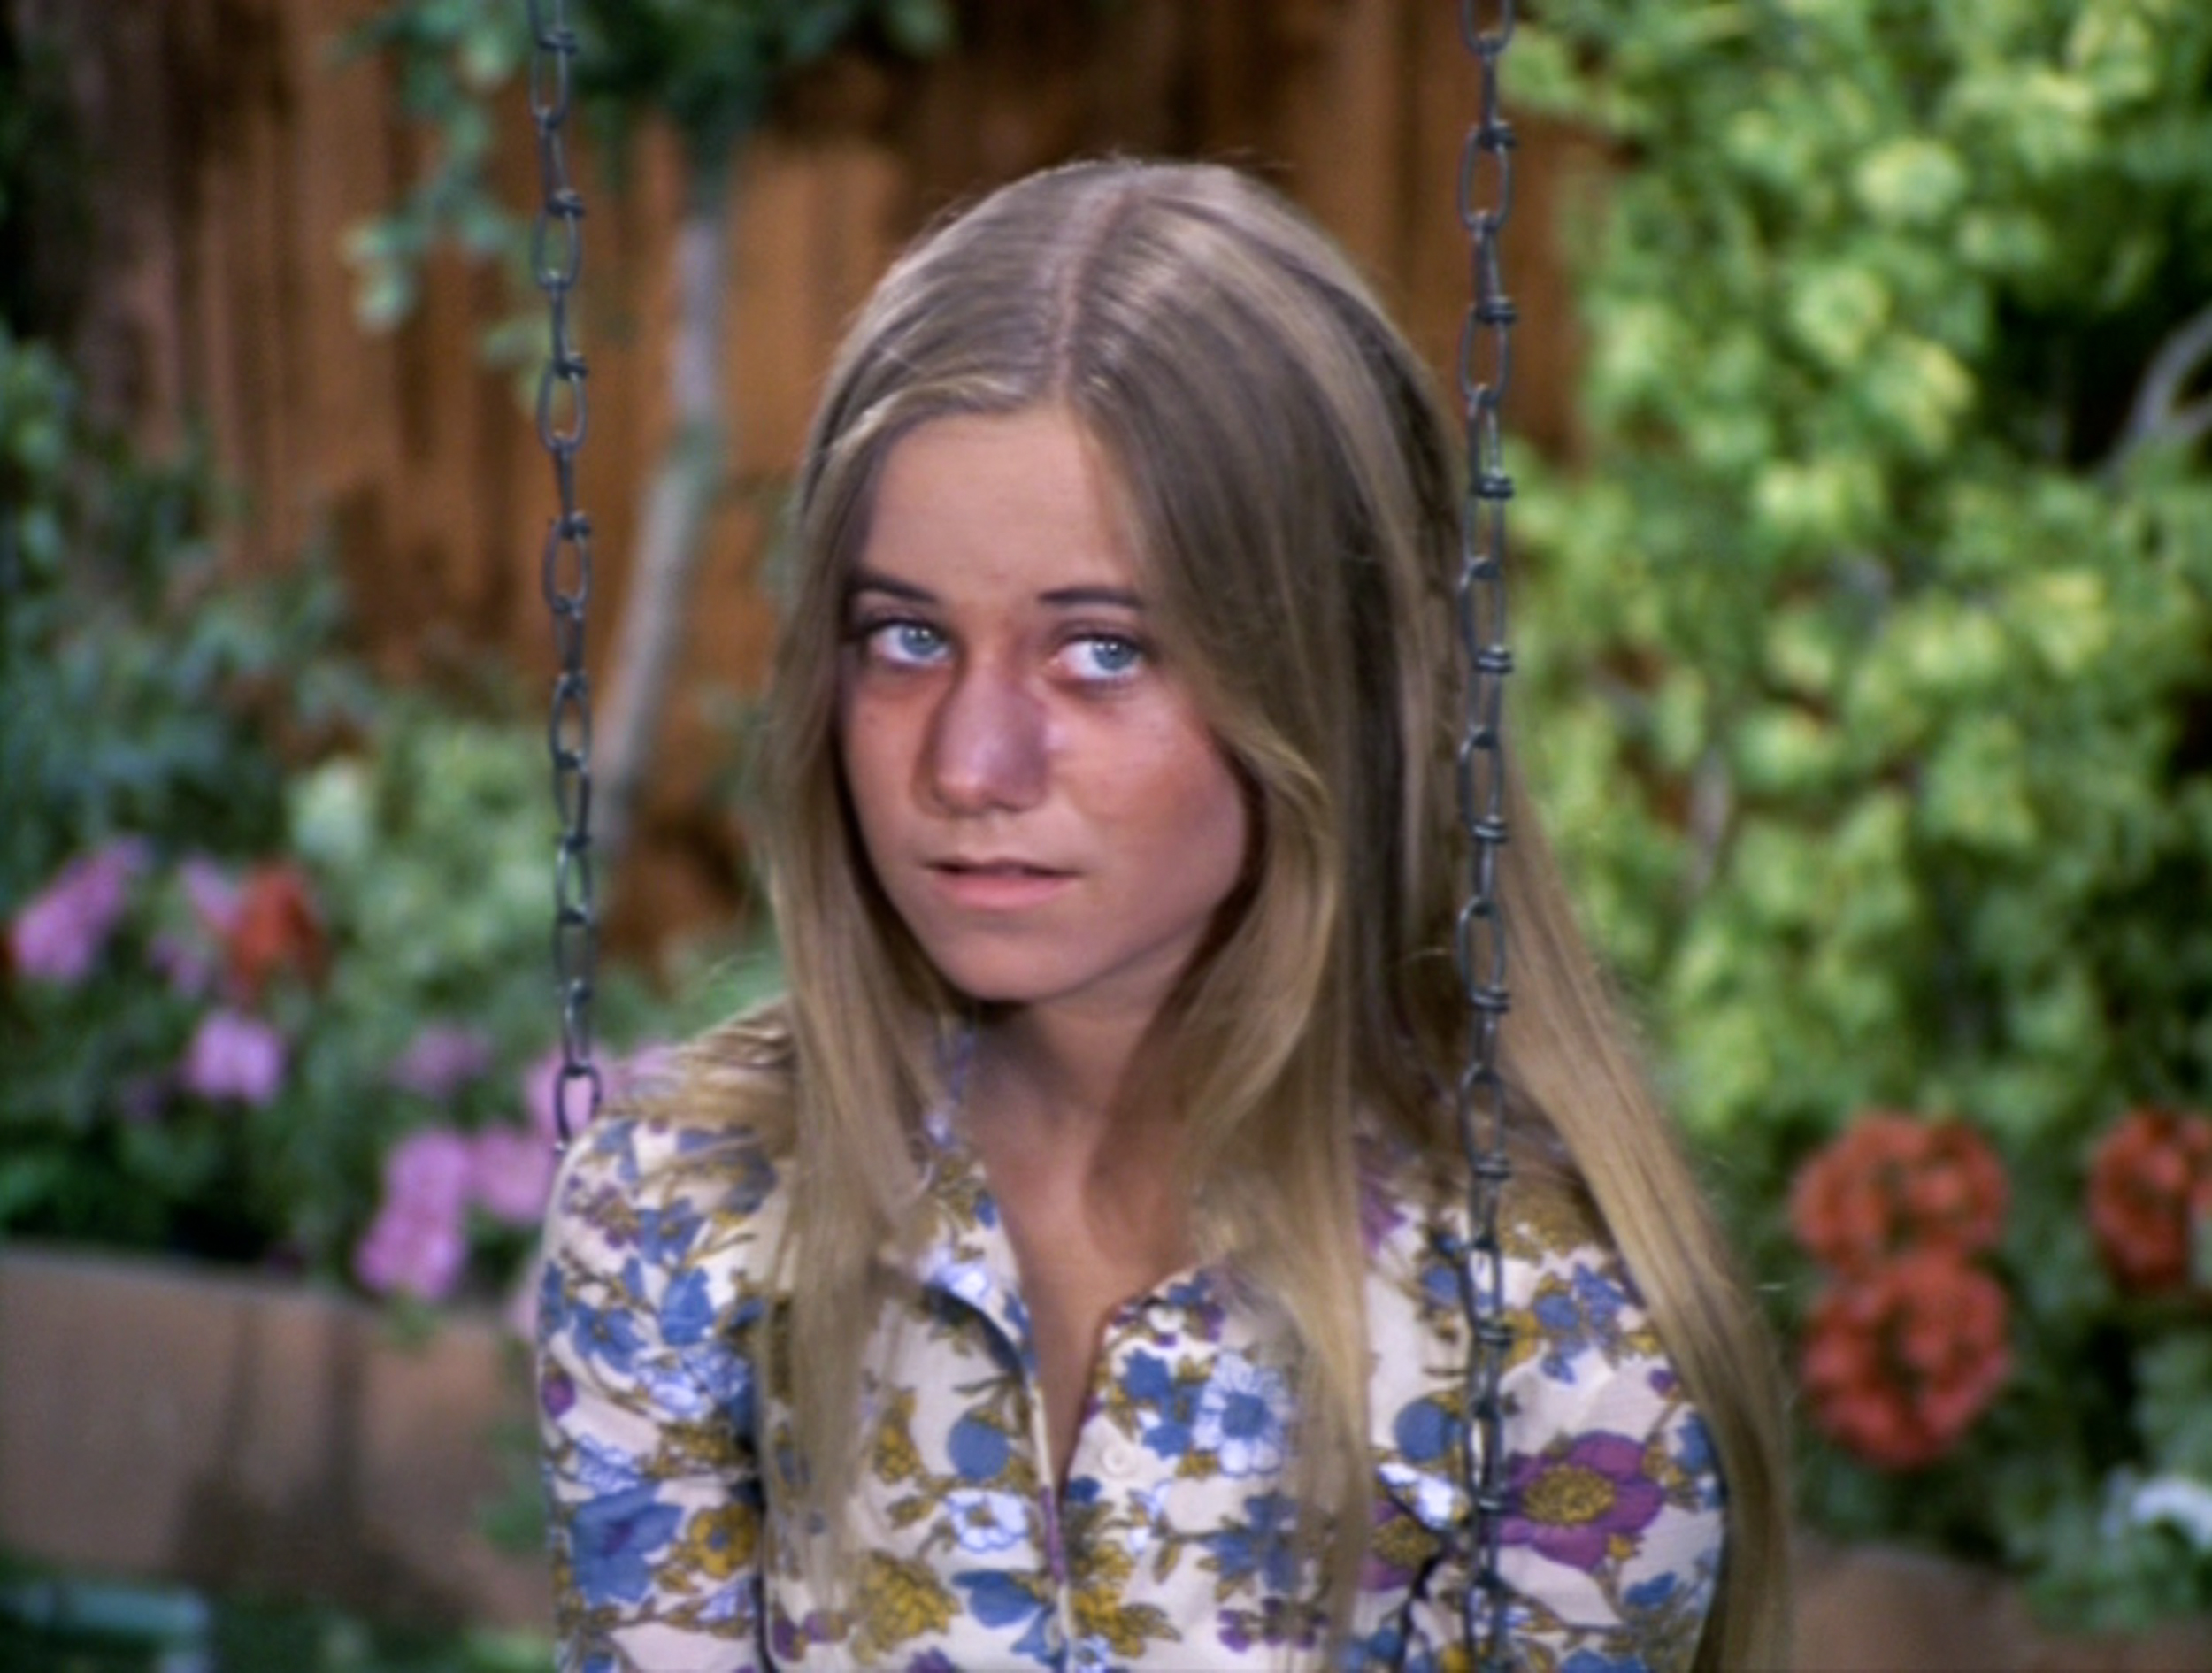 Maureen McCormick as Marcia Brady in "The Brady Bunch" in 1973 in Los Angeles | Source: Getty Images